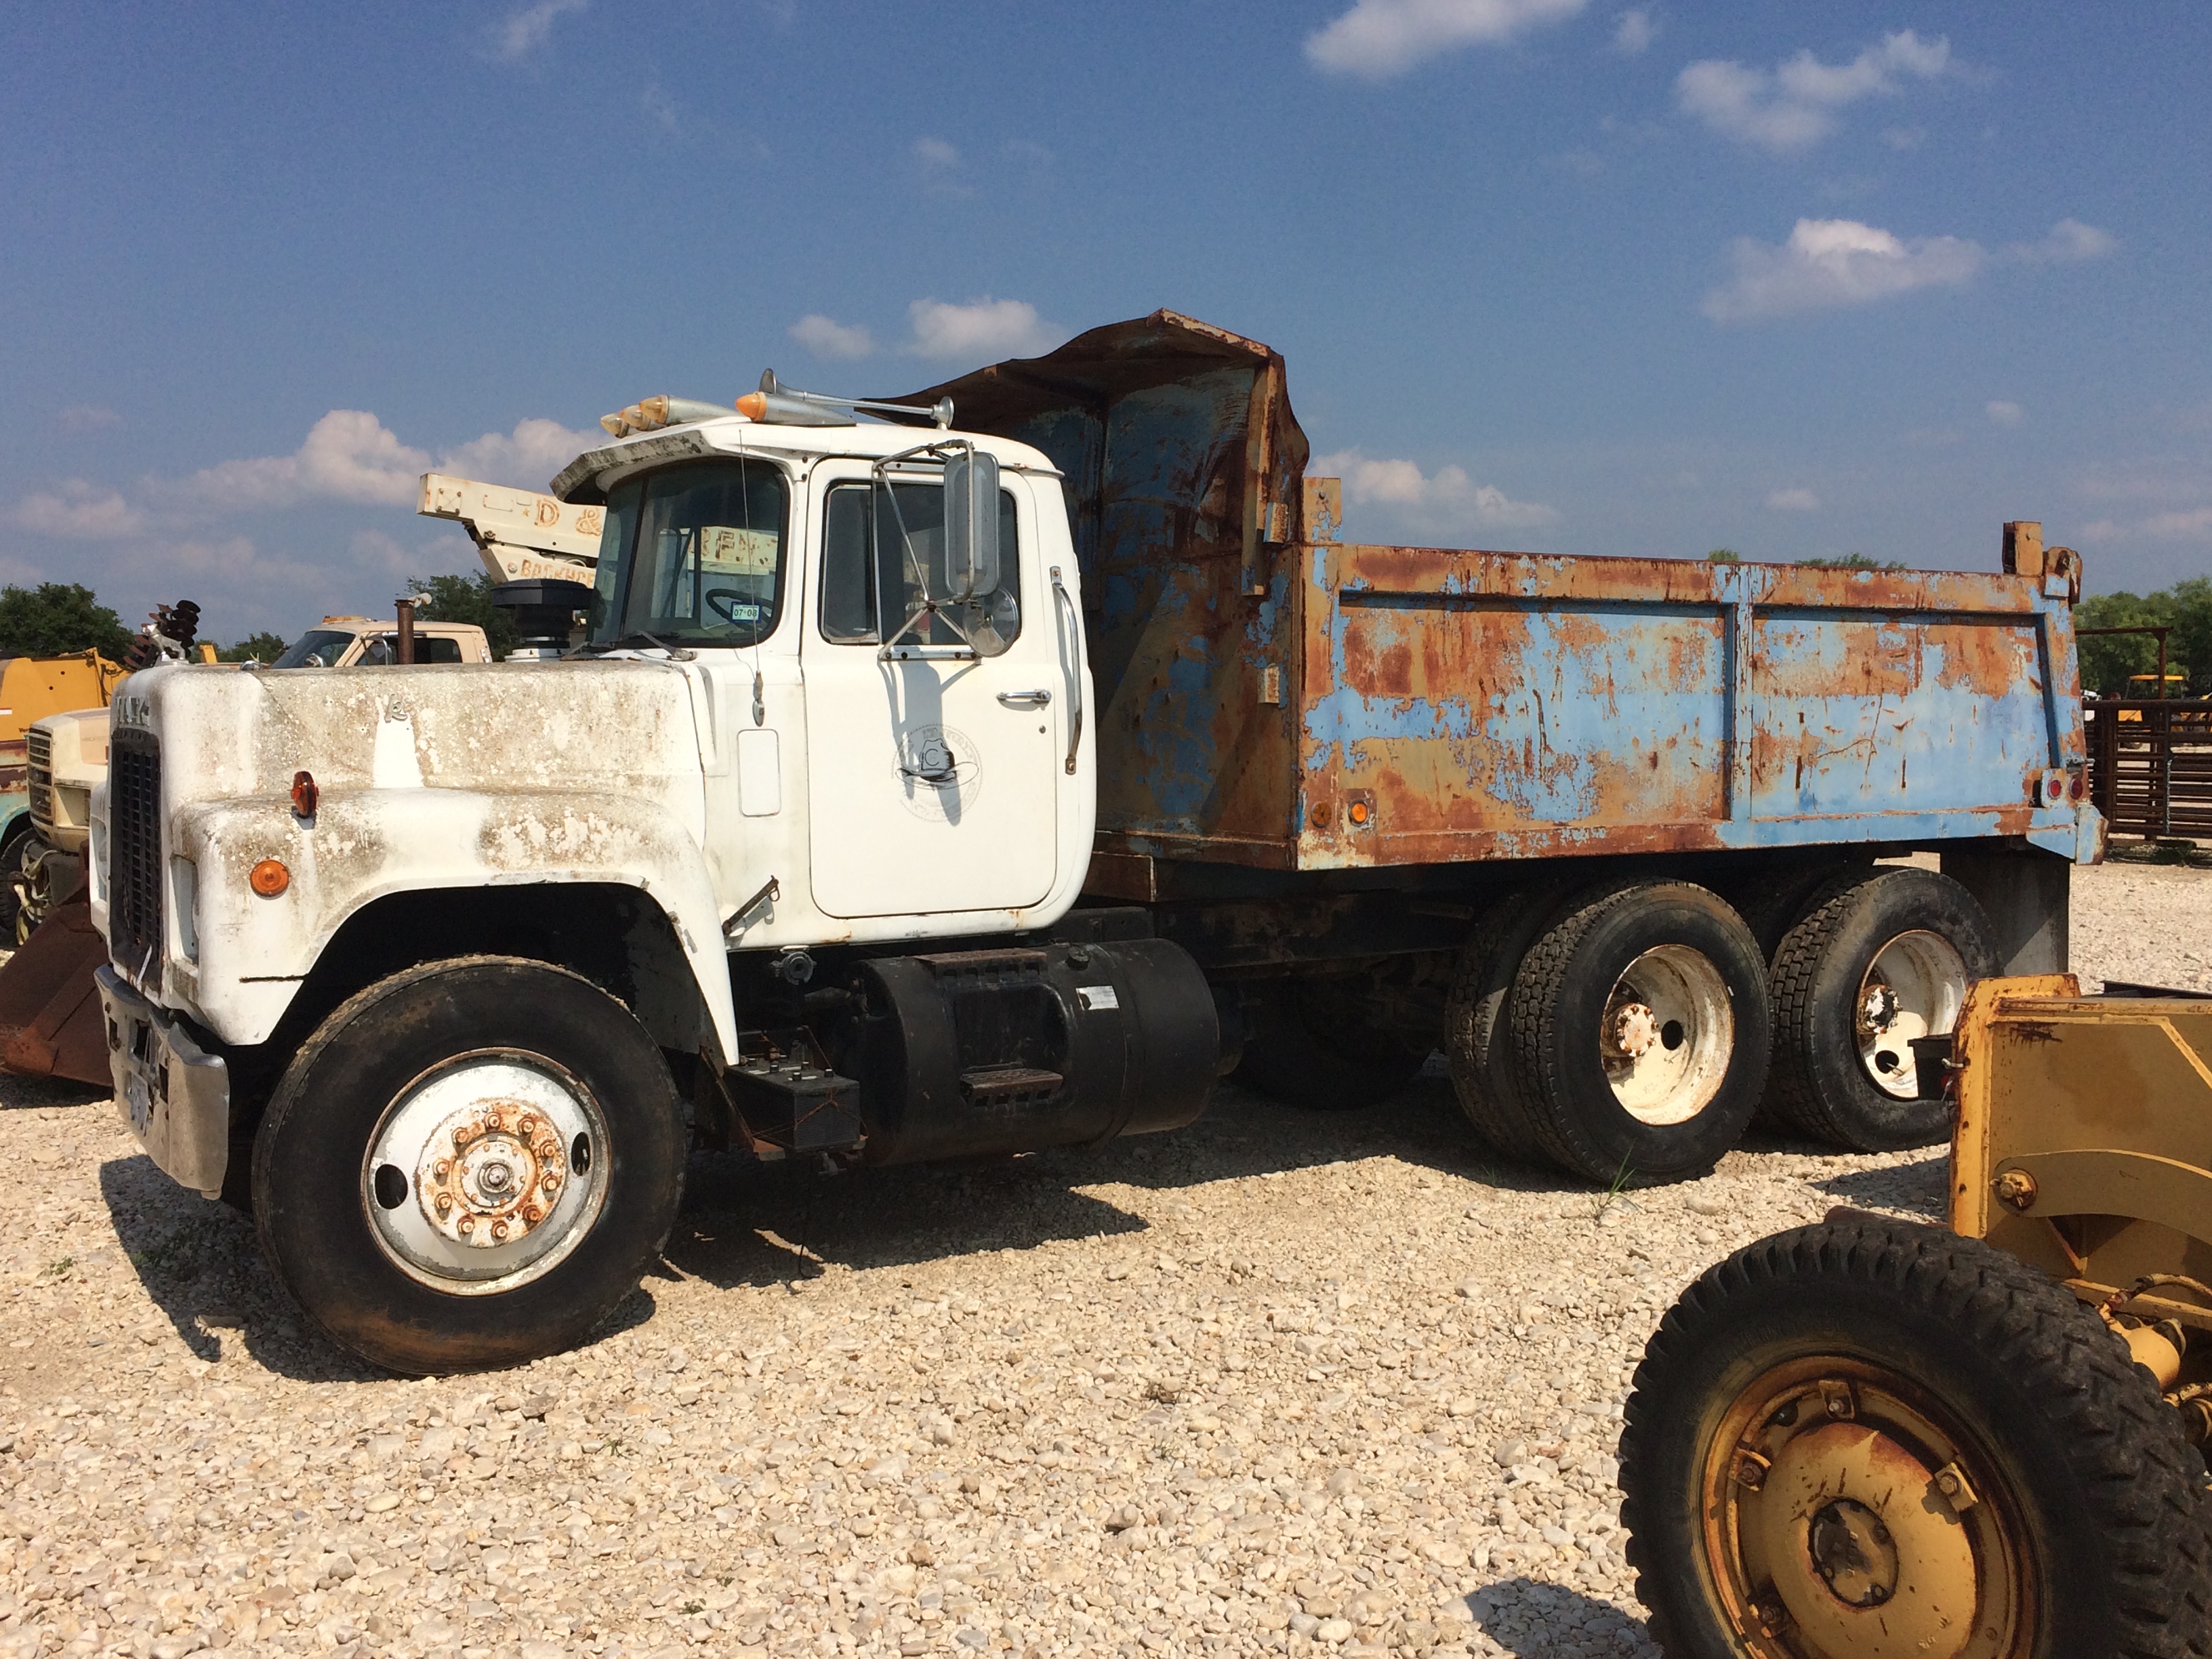 I just picked up a 1989 Mack r model from an auction and I am going to try ...